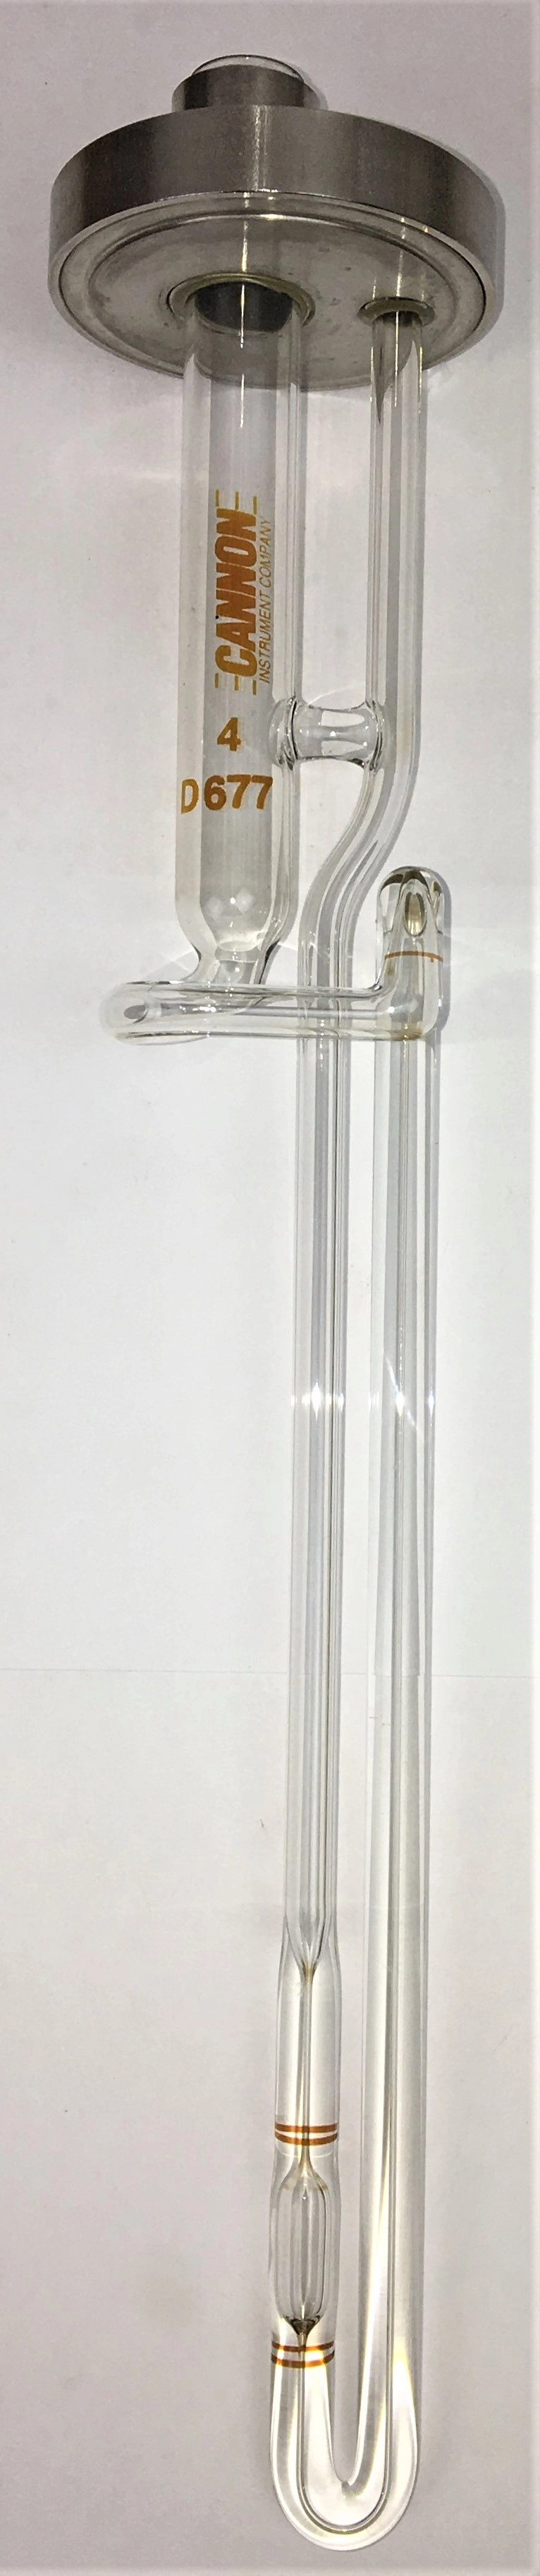 Cannon ZCAC-RO-4 Zeitfuchs Cross-Arm Viscometer Tube with Holder (No Certificate) - Size 4